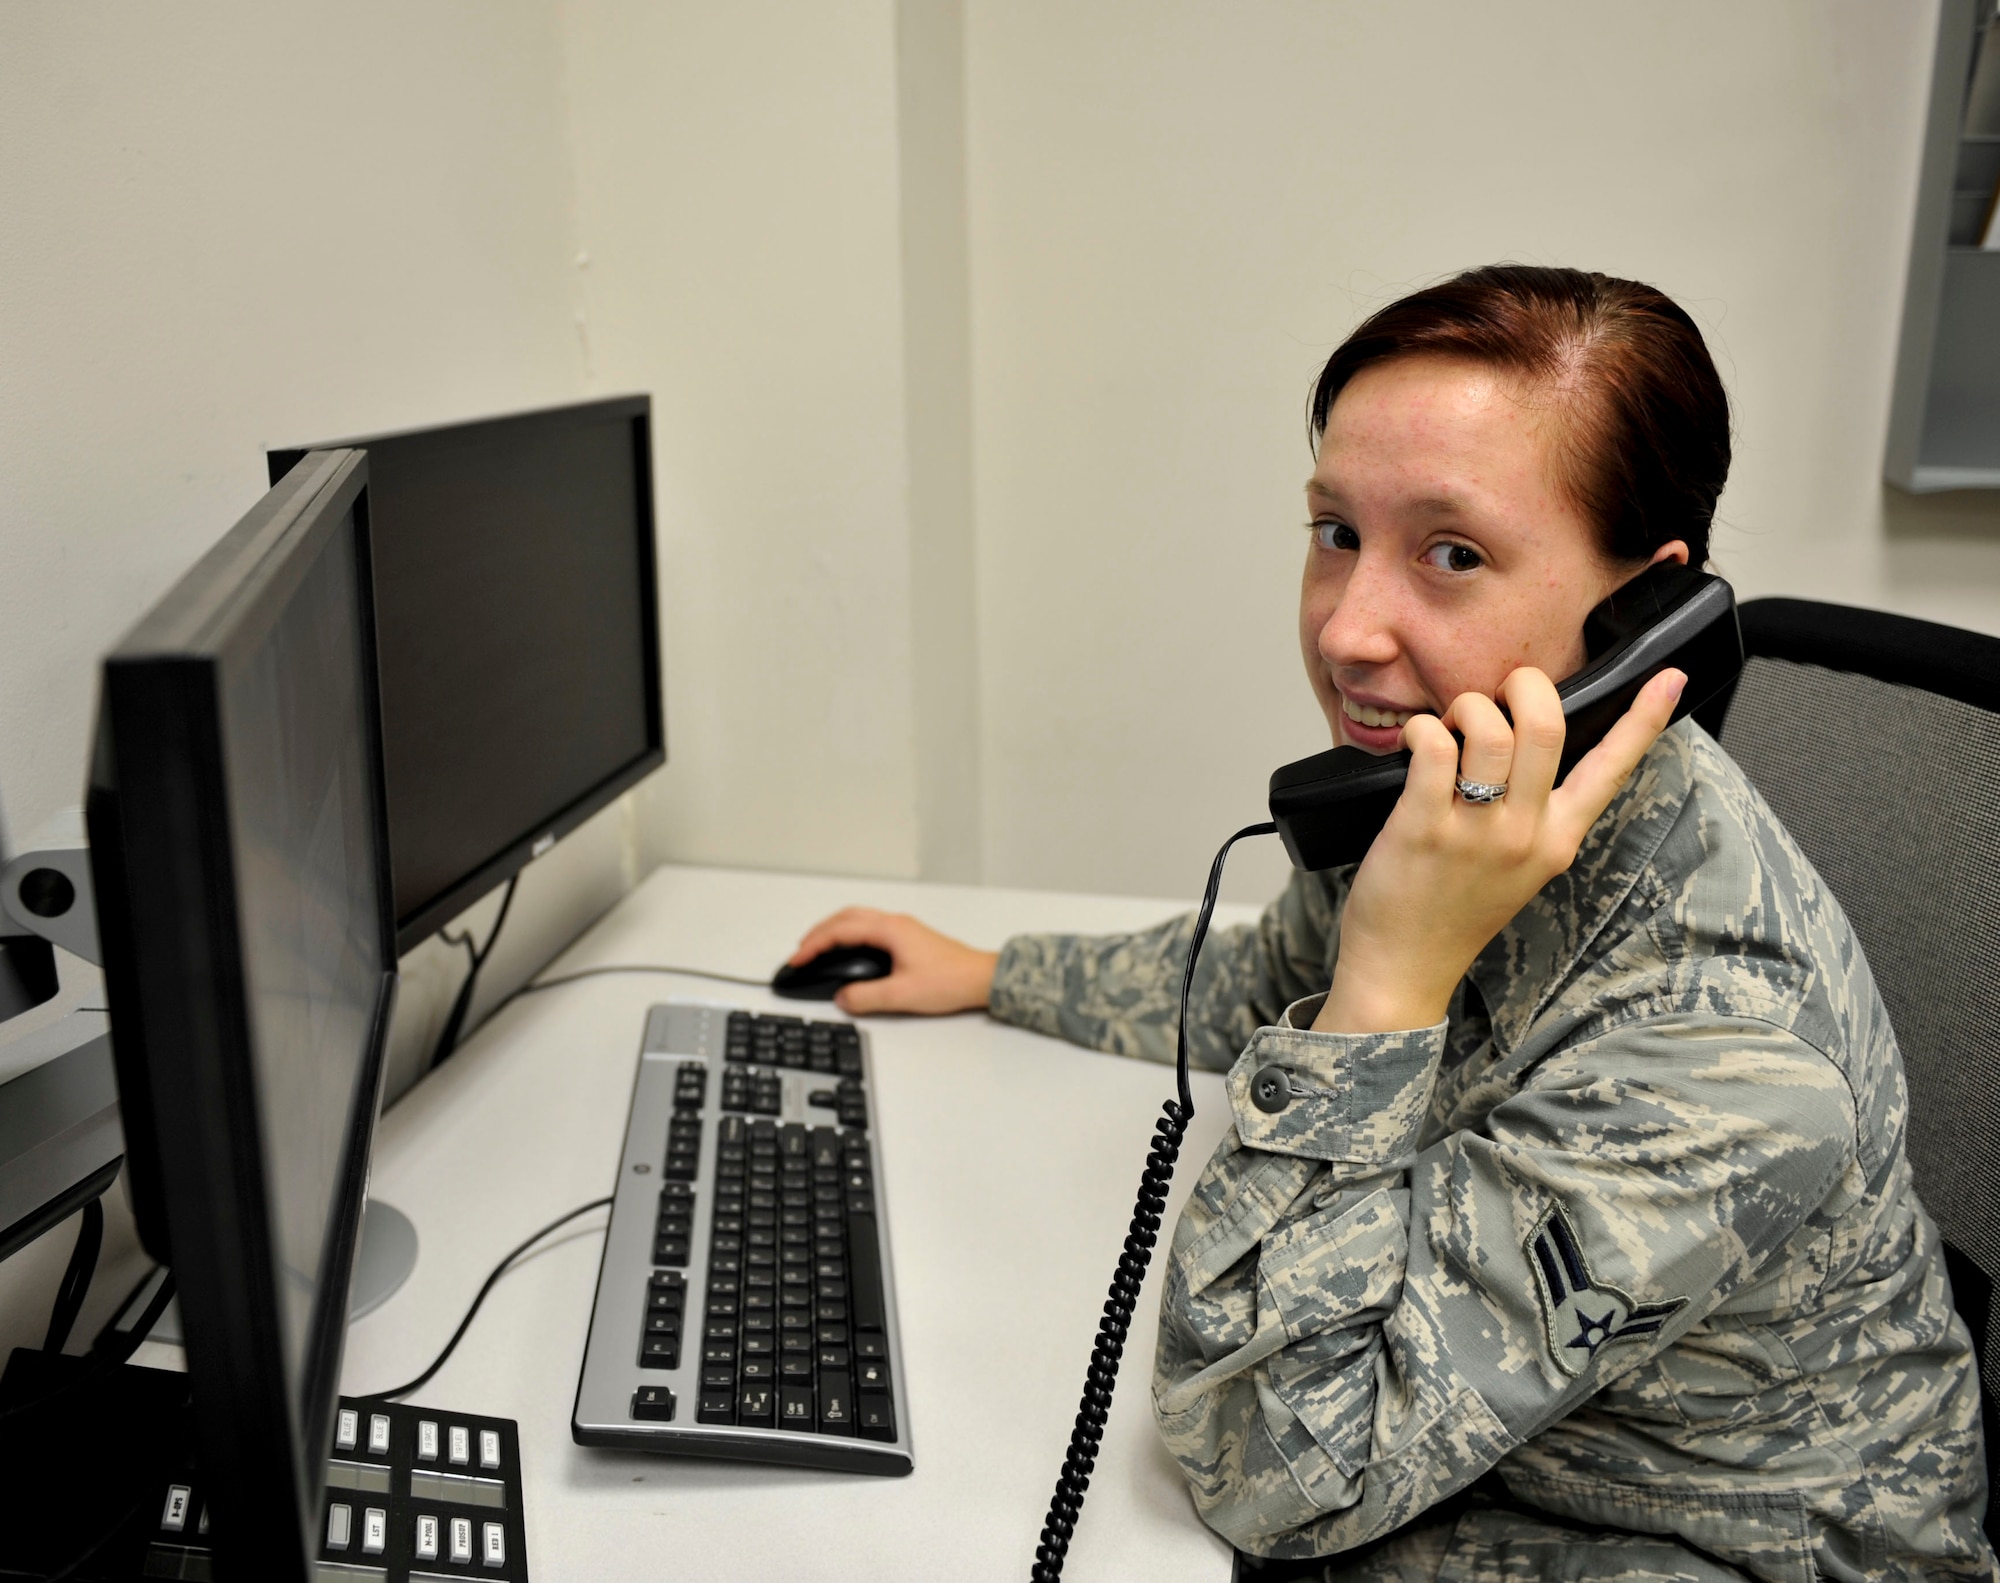 Airman 1st Class Justine Apple, a 314th Aircraft Maintenance Squadron apprentice, was named Combat Airlifter of the Week July 8, 2015, at Little Rock Air Force Base, Ark. Apple, a Norwood, Missouri native, aids in the supervision of the flying schedules for the 314th Airlift Wing and 189th AW assigned to Air Education and Training Command and the Arkansas Air National Guard. (U.S. Air Force photo by Senior Airman Stephanie Serrano)